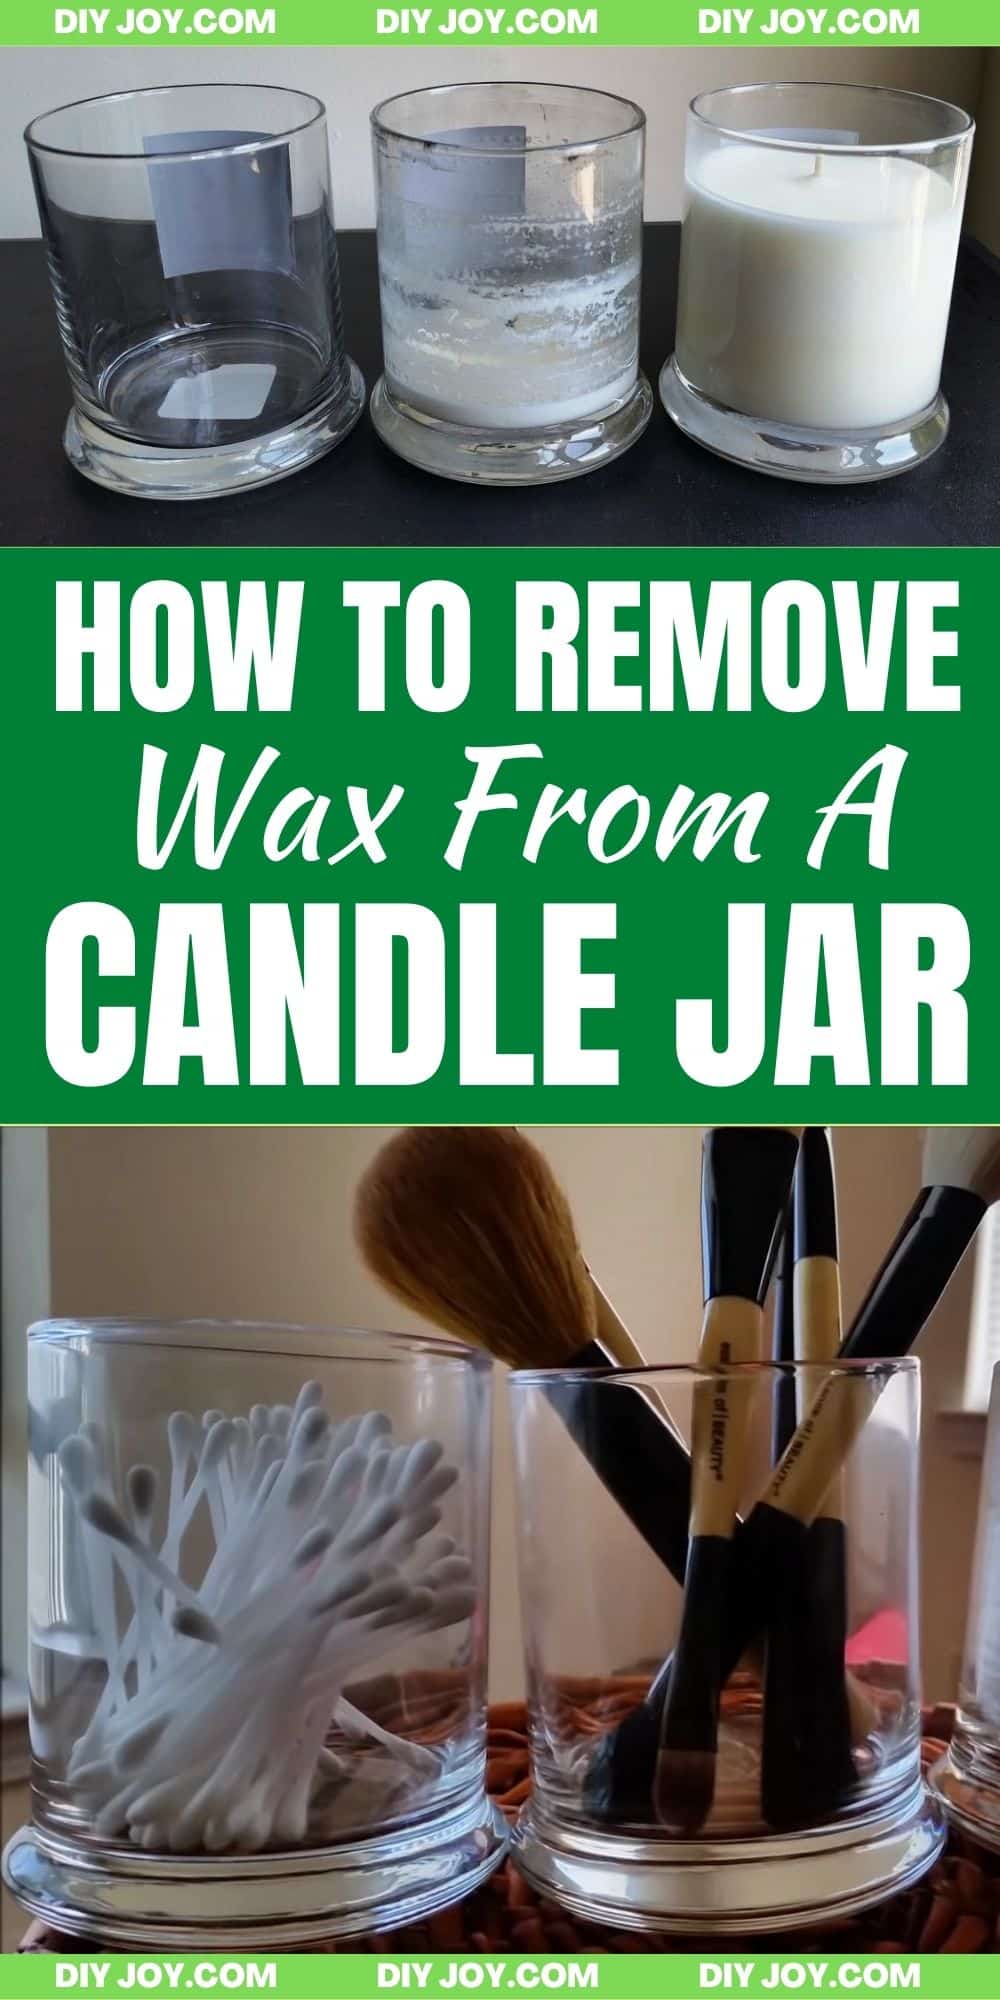 How to Remove Wax From a Candle Jar 4 Ways – VedaOils